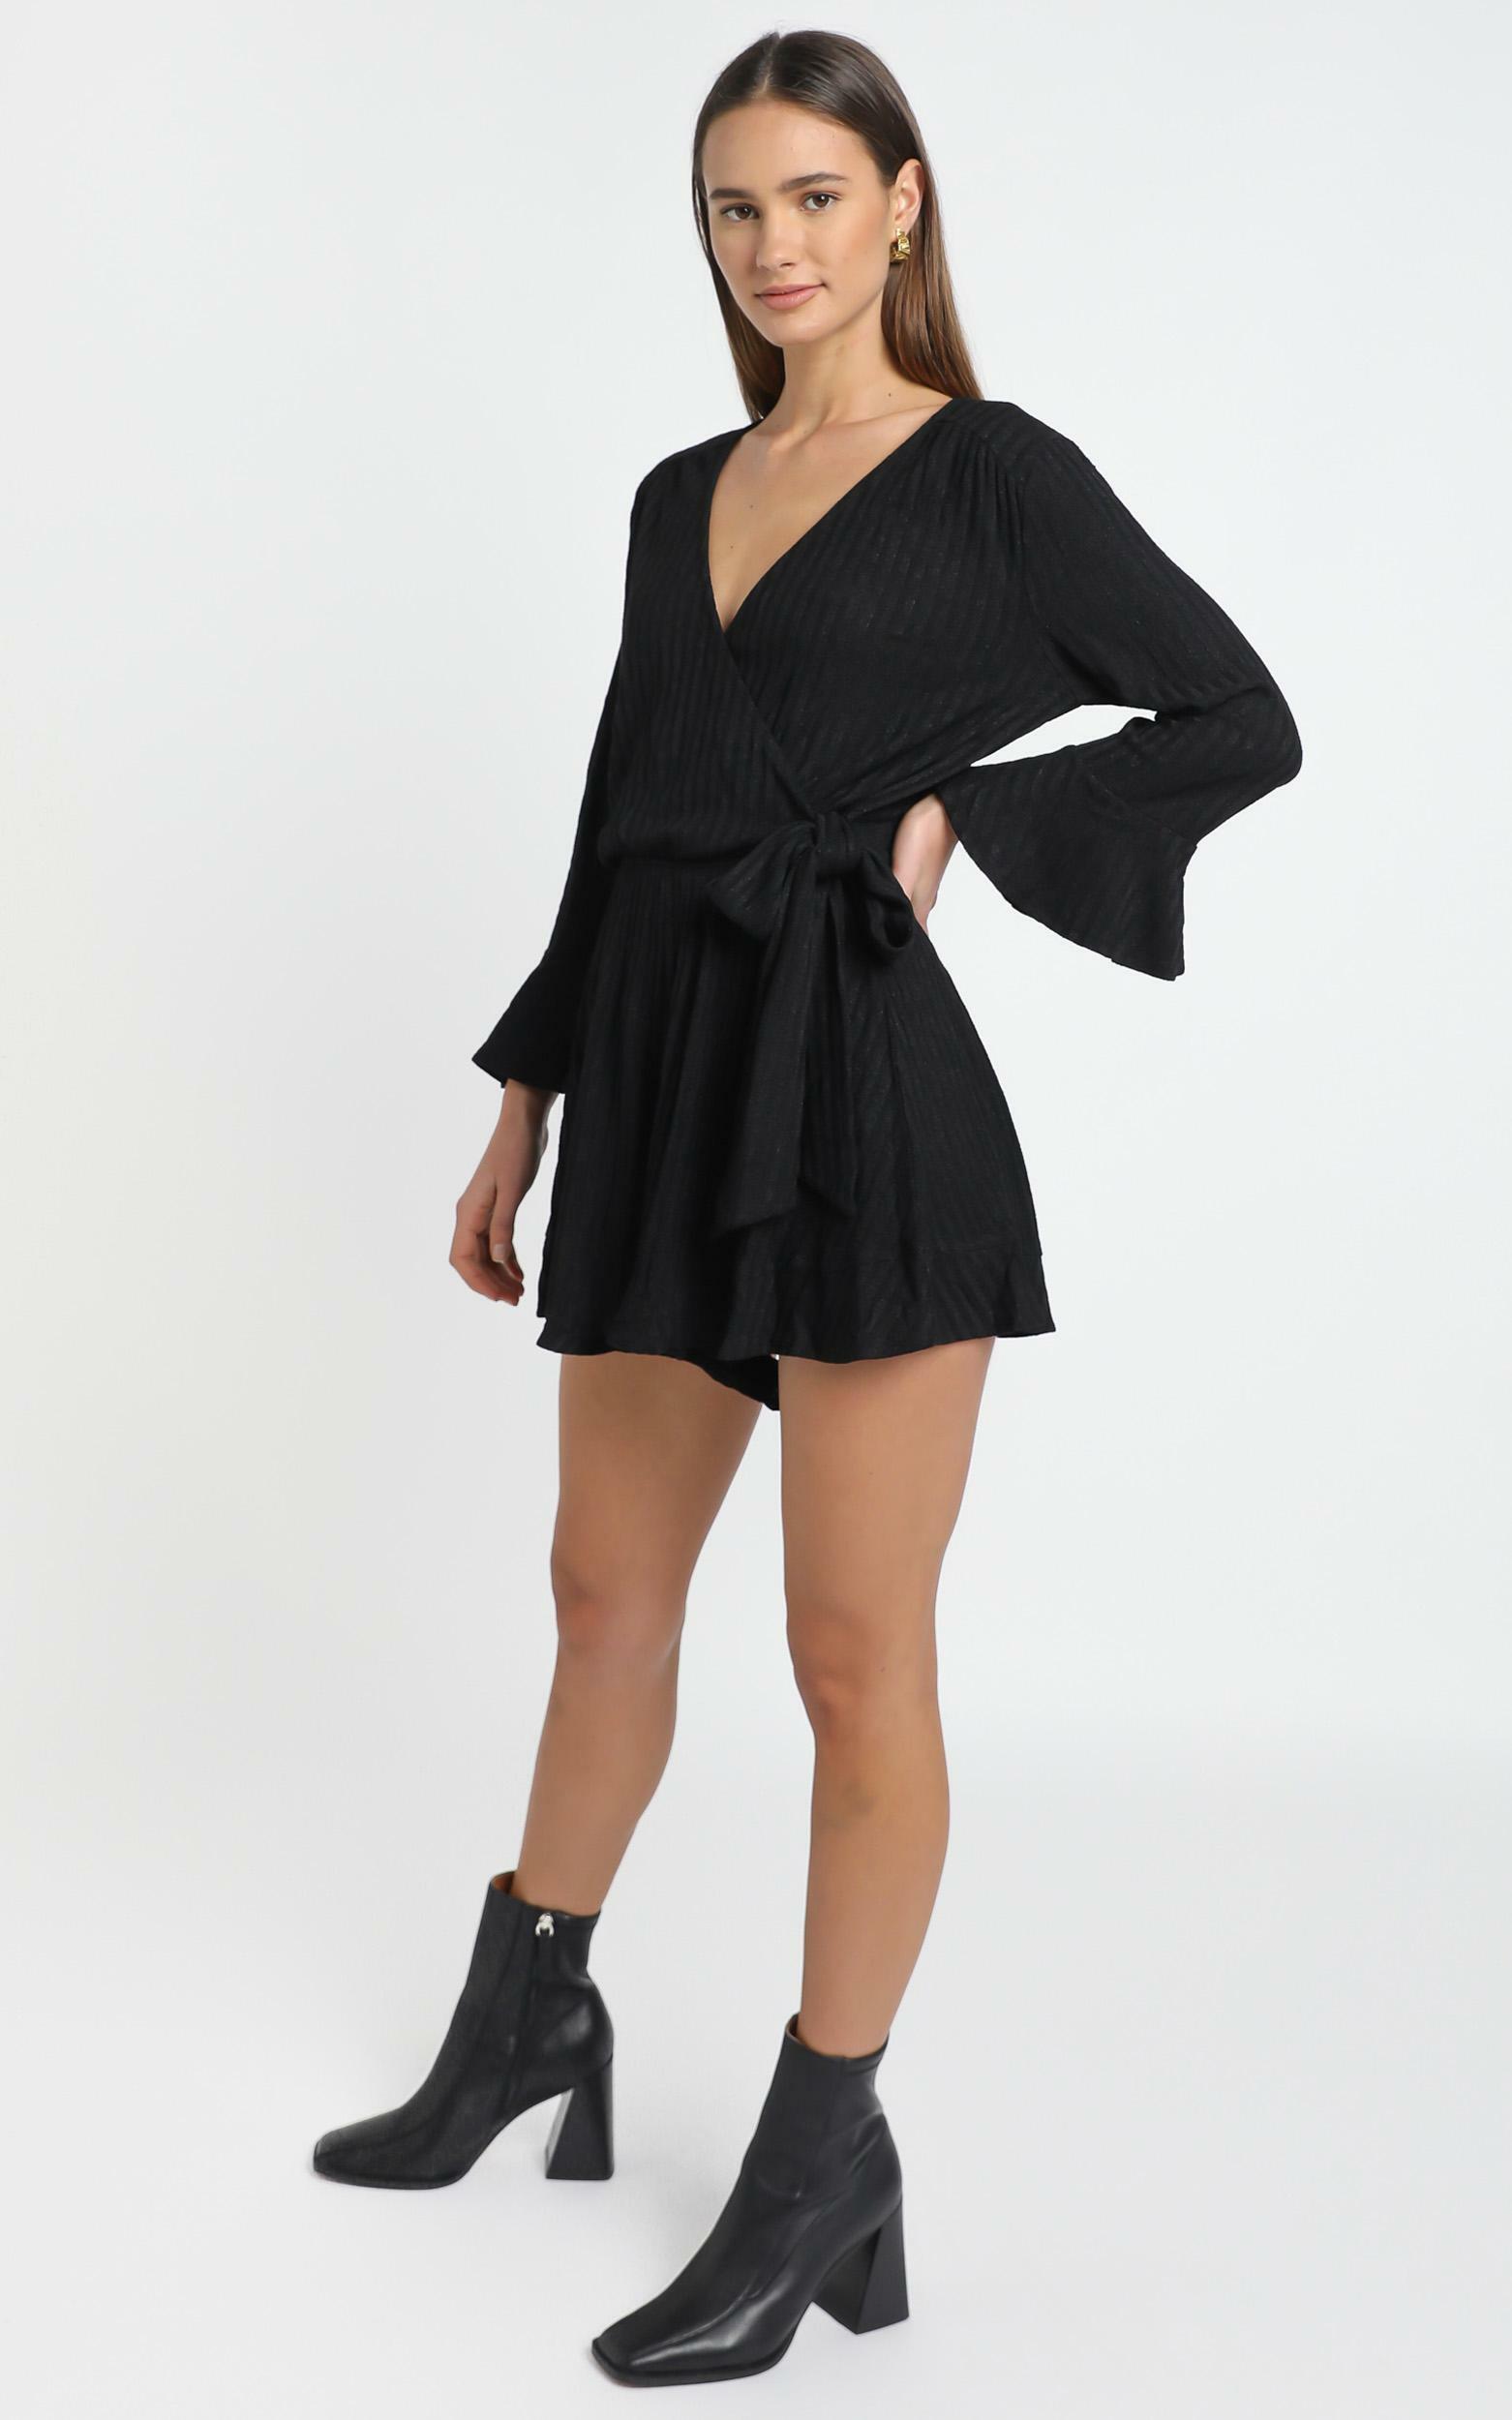 New and Fresh Playsuit in black rib - 6 (XS), Black, hi-res image number null